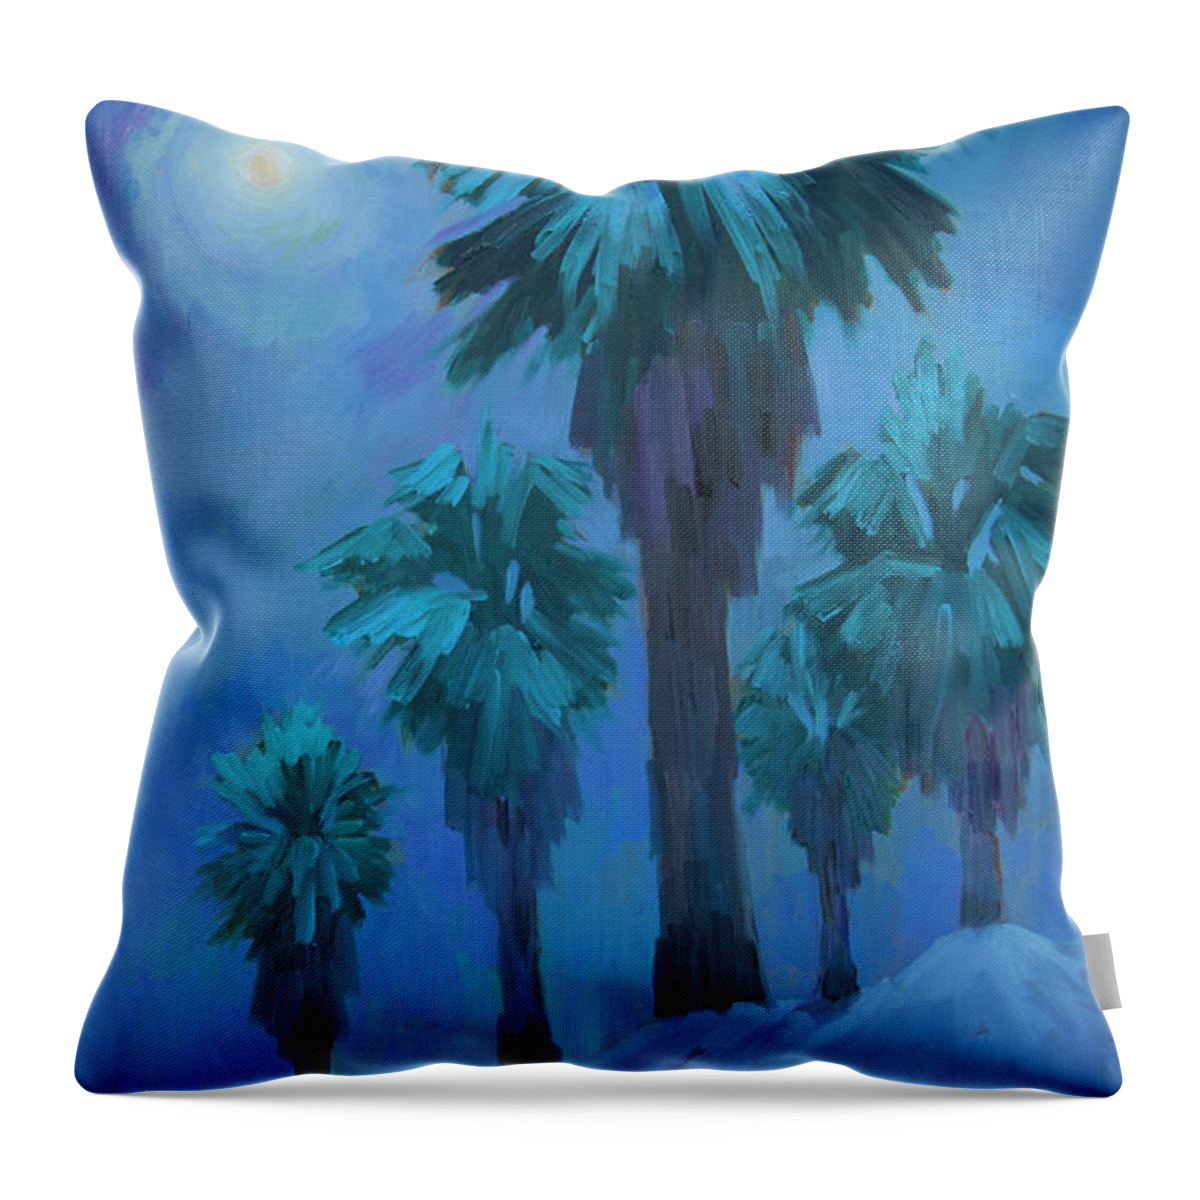 Moon Throw Pillow featuring the painting Moonlight Reflections by Diane McClary